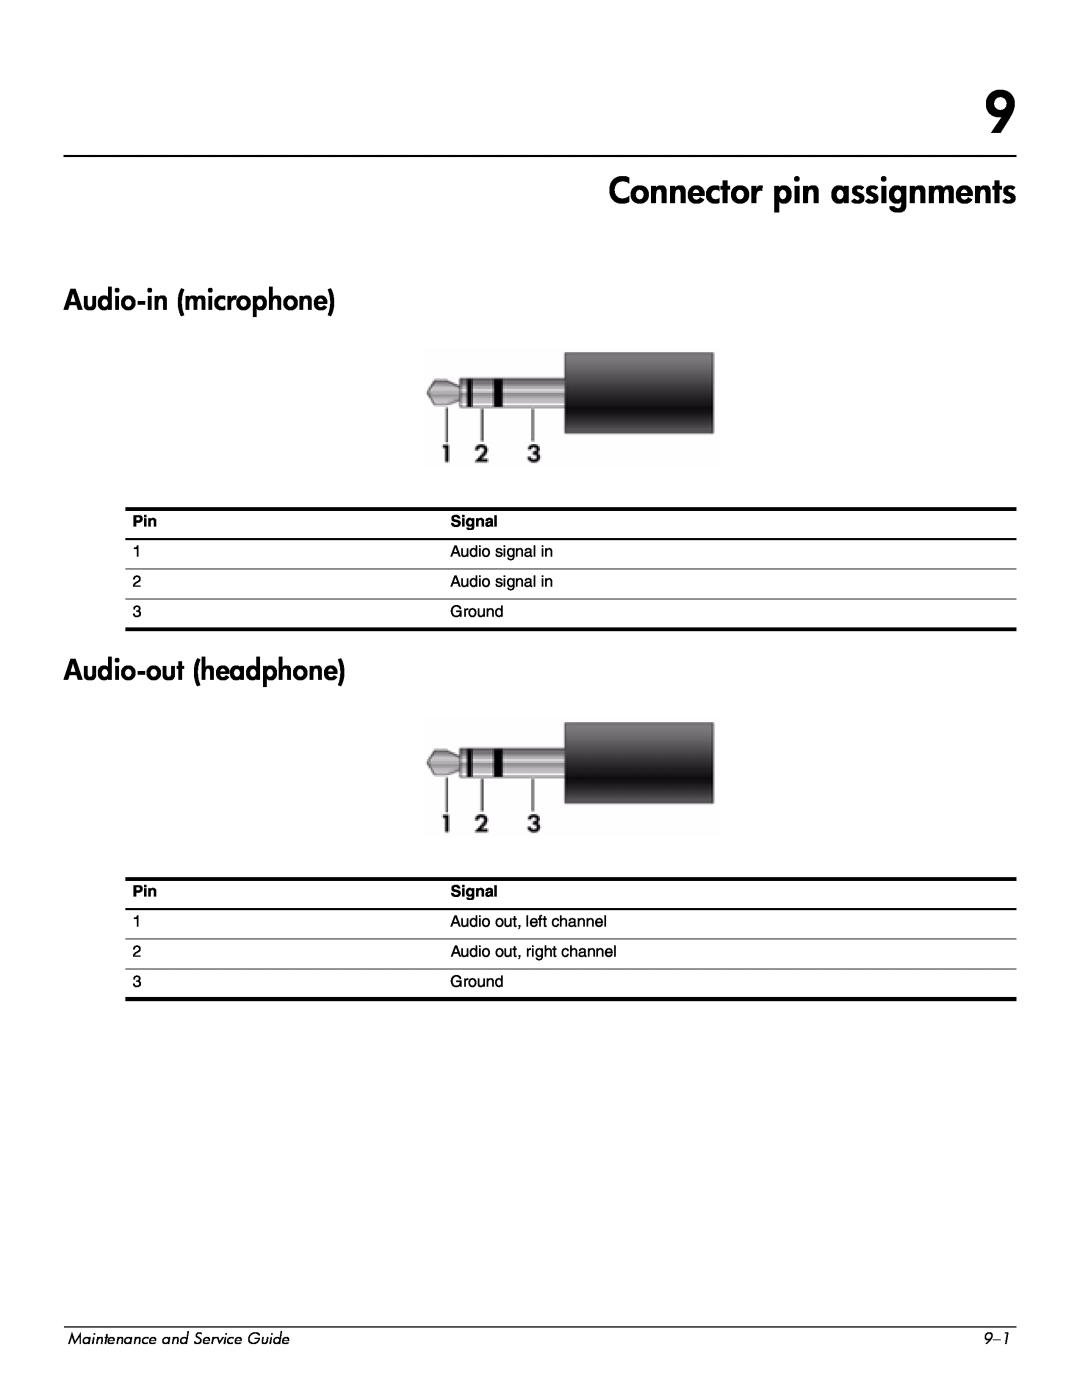 Compaq 515, 511, 510 manual Connector pin assignments, Audio-in microphone, Audio-out headphone 